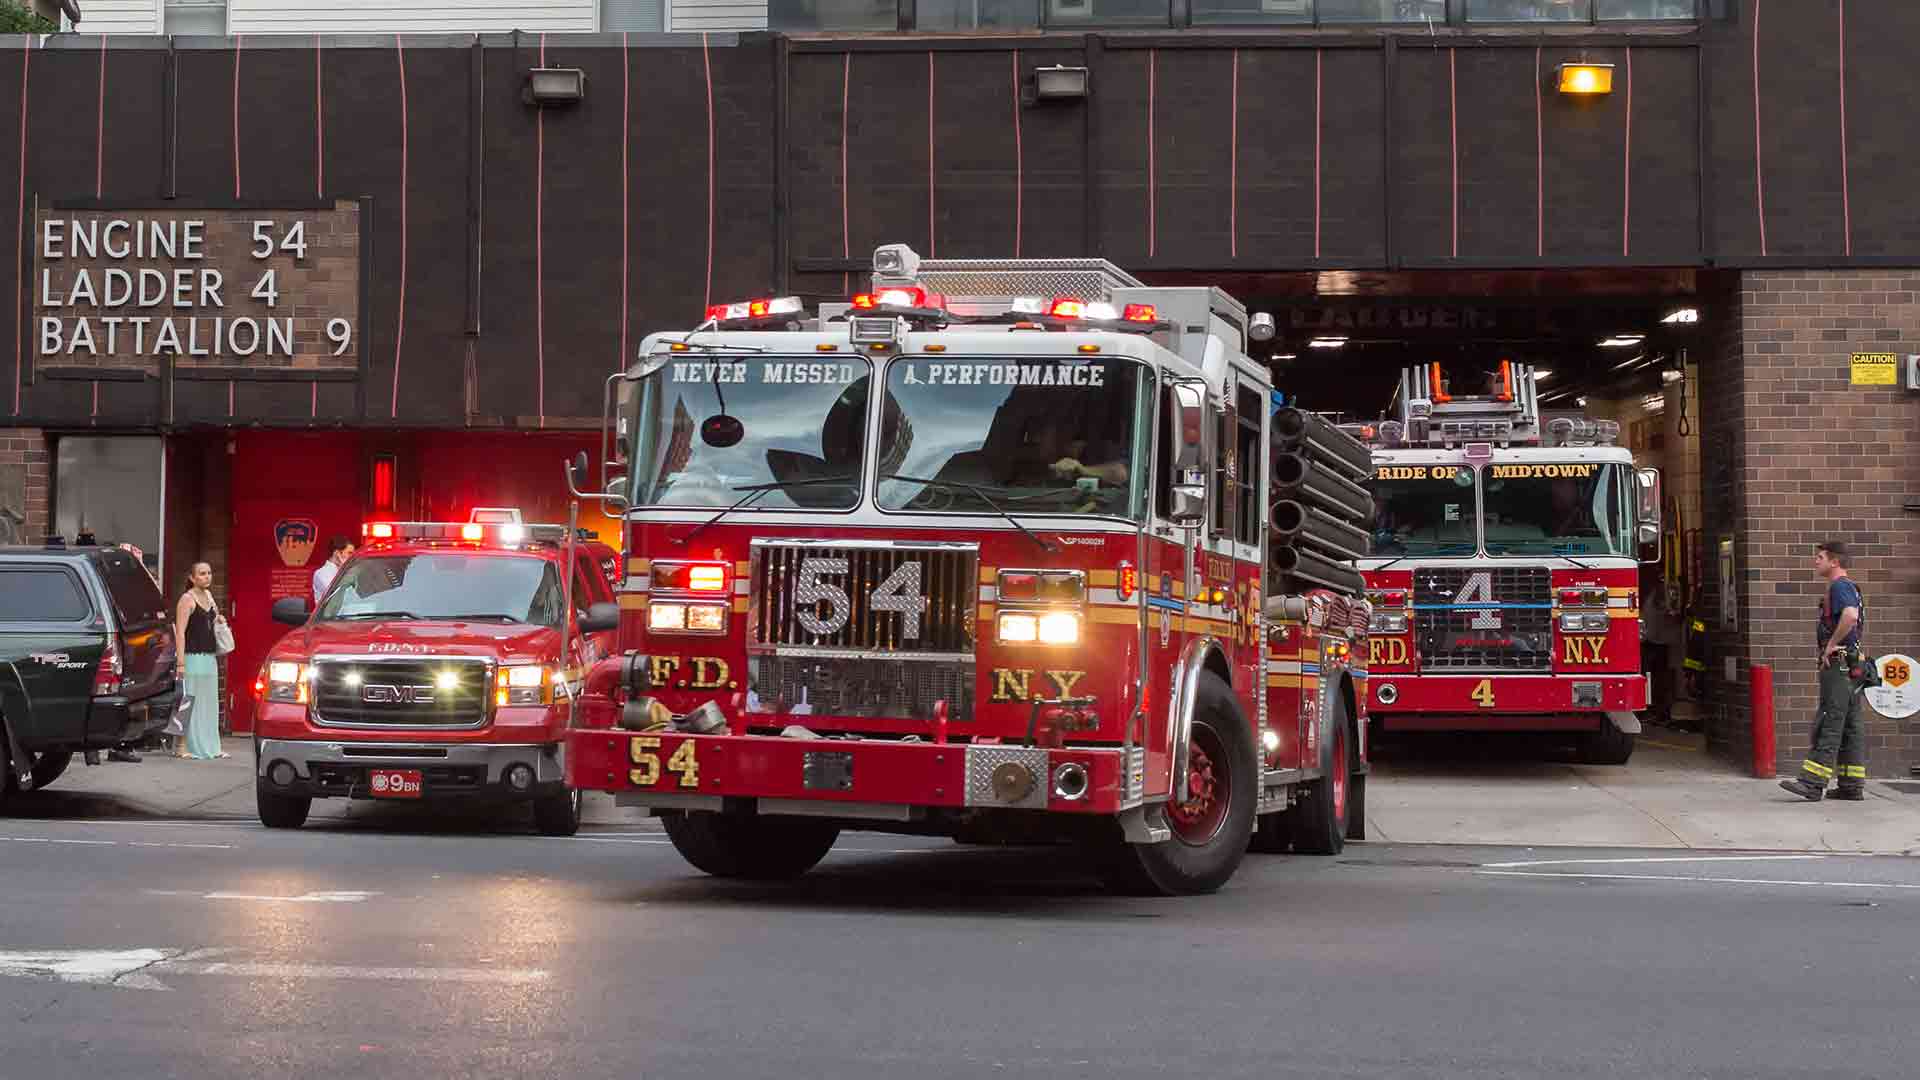 FDNY firetruck leaving the station